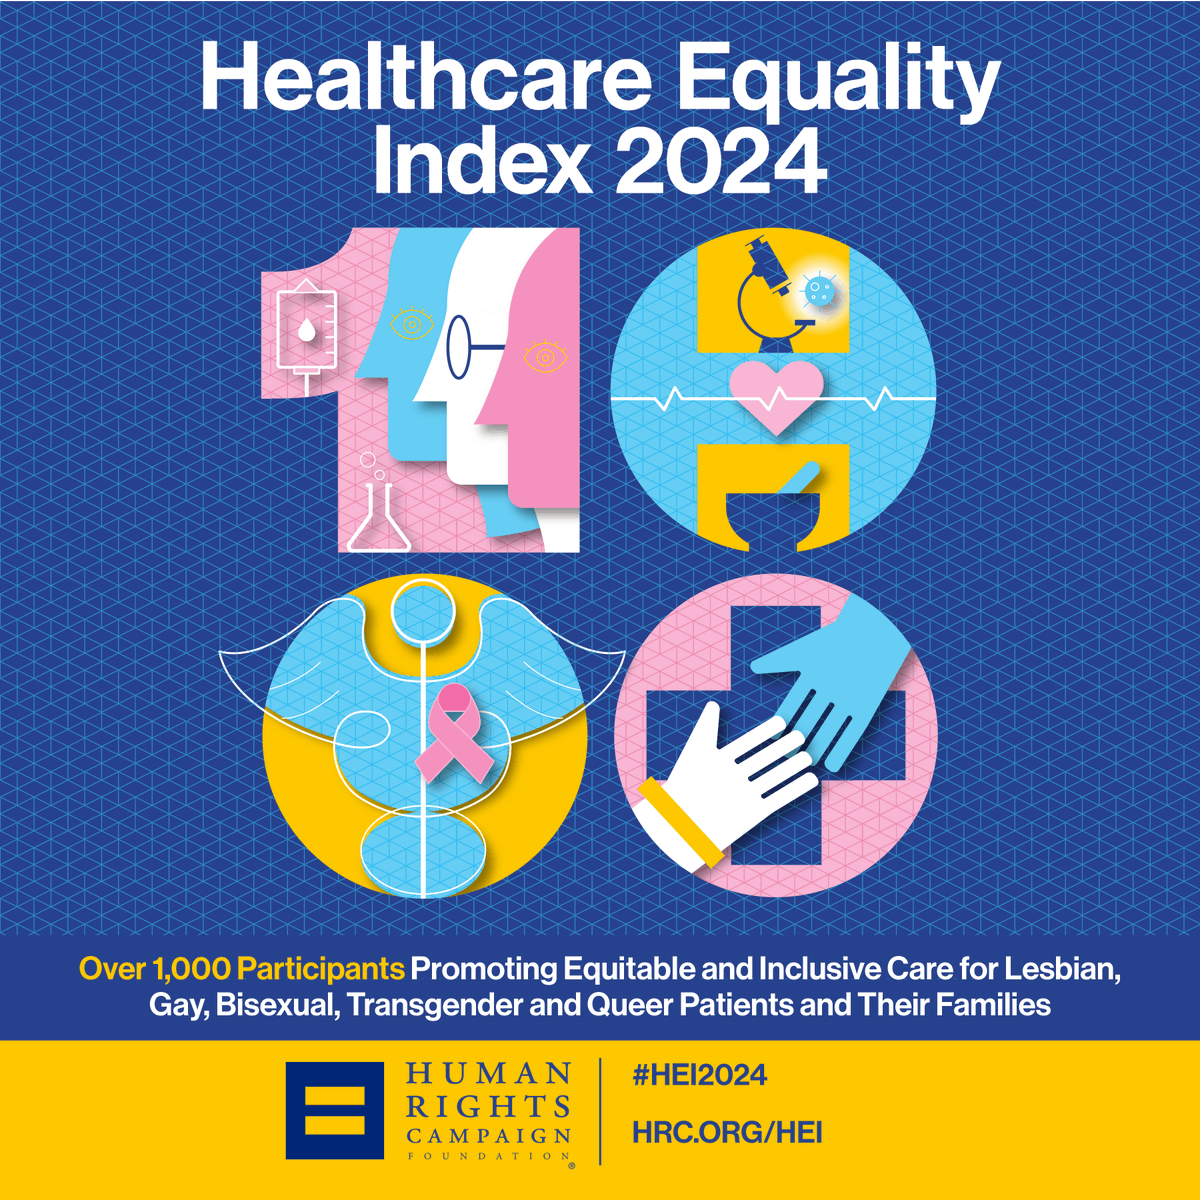 Every person deserves to feel safe, comfortable and welcomed by their healthcare provider. That’s why we’re proud to be recognized in the @HRC's 2024 Healthcare Equality Index. We’re proud to provide the right care to our LGBTQ+ community. Learn more: hrc.org/hei.